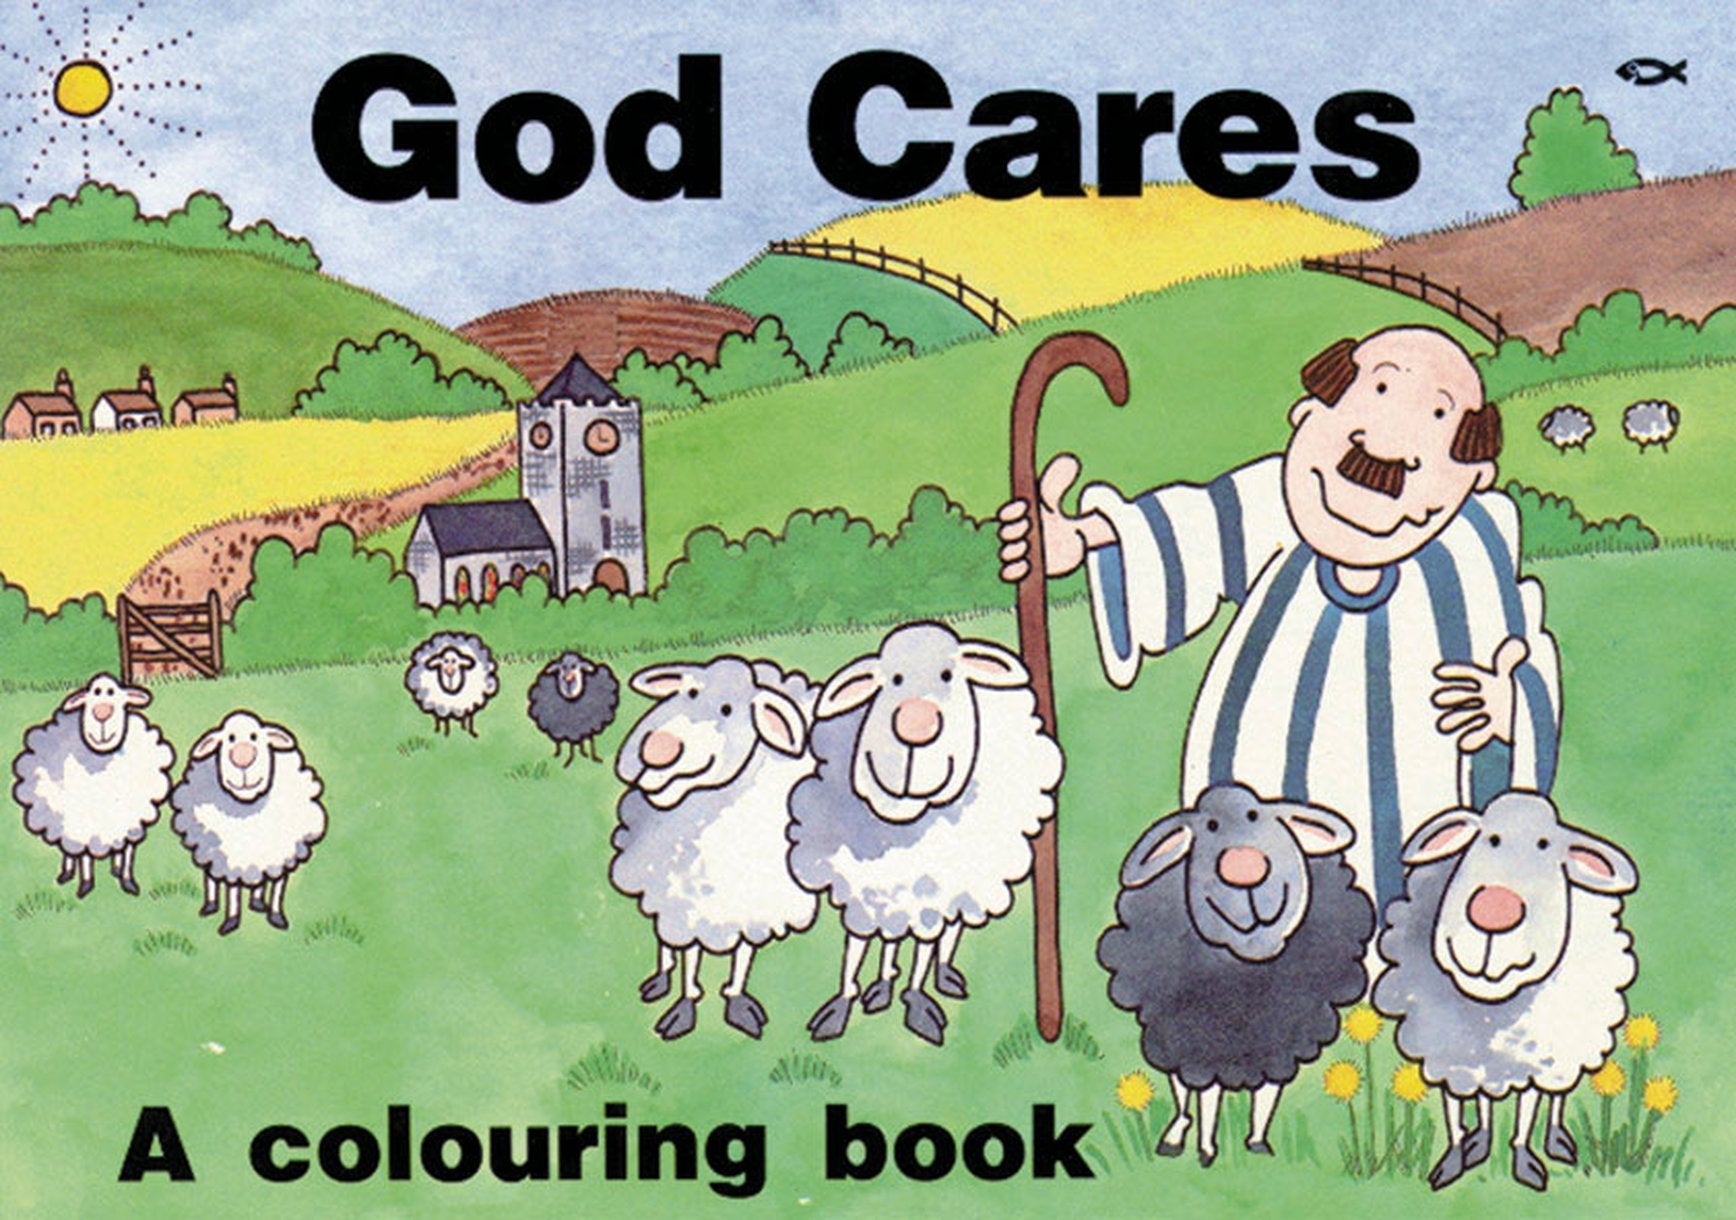 Image of God Cares other